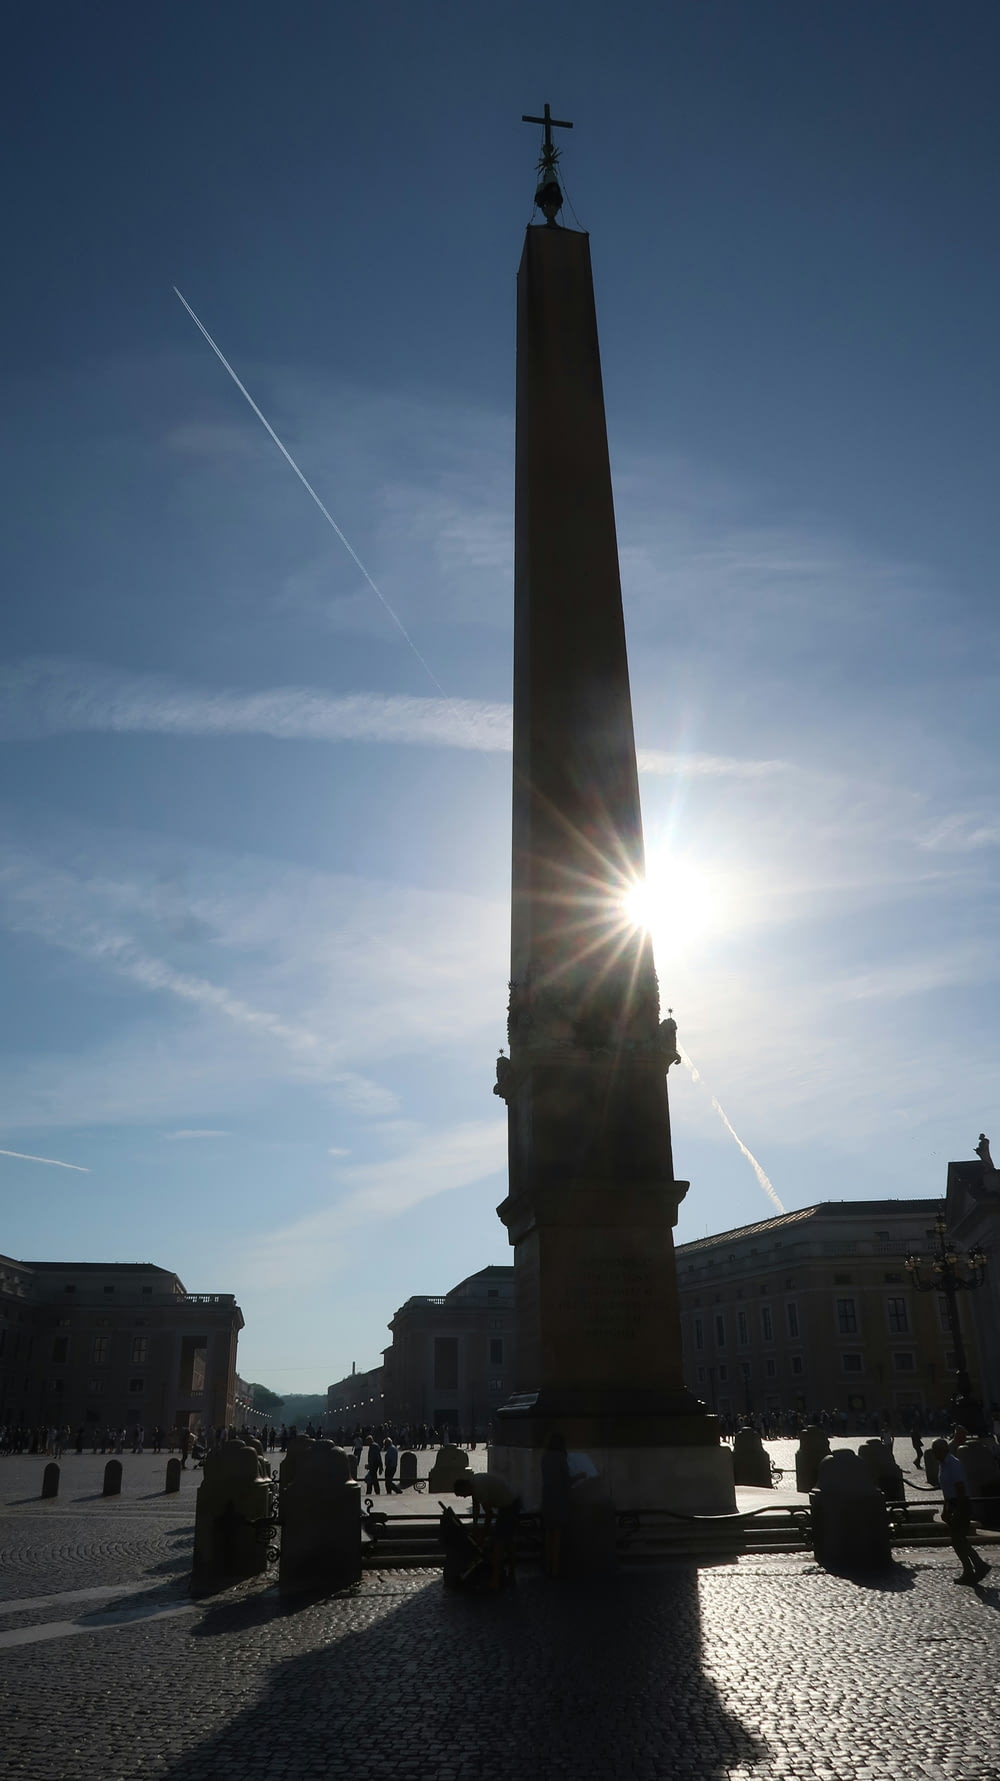 the sun is shining behind a tall monument